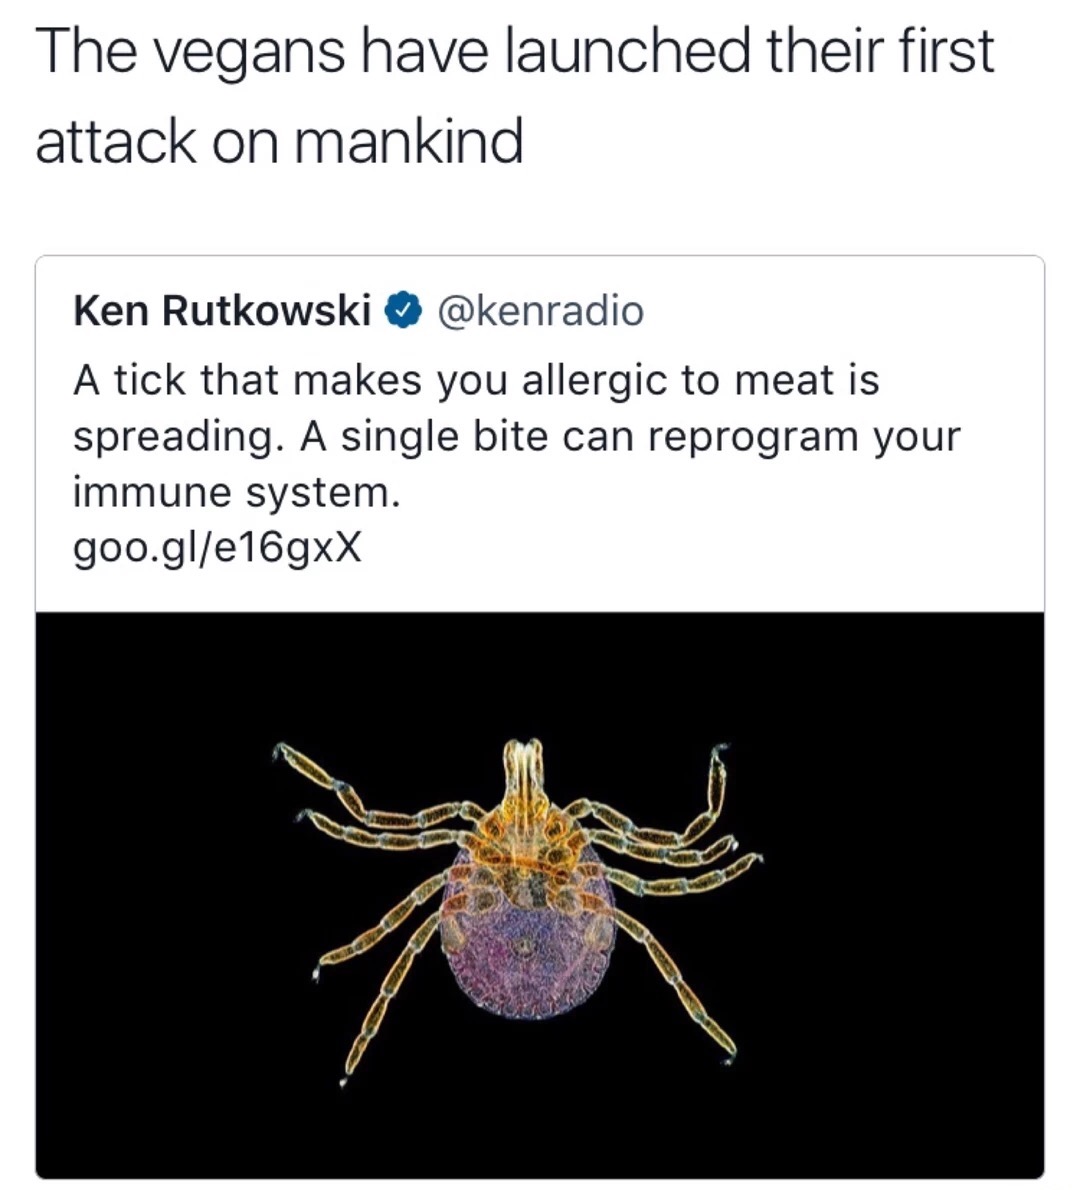 memes - vegan tick meme - The vegans have launched their first attack on mankind Ken Rutkowski ~ A tick that makes you allergic to meat is spreading. A single bite can reprogram your immune system. goo.gle16gxX